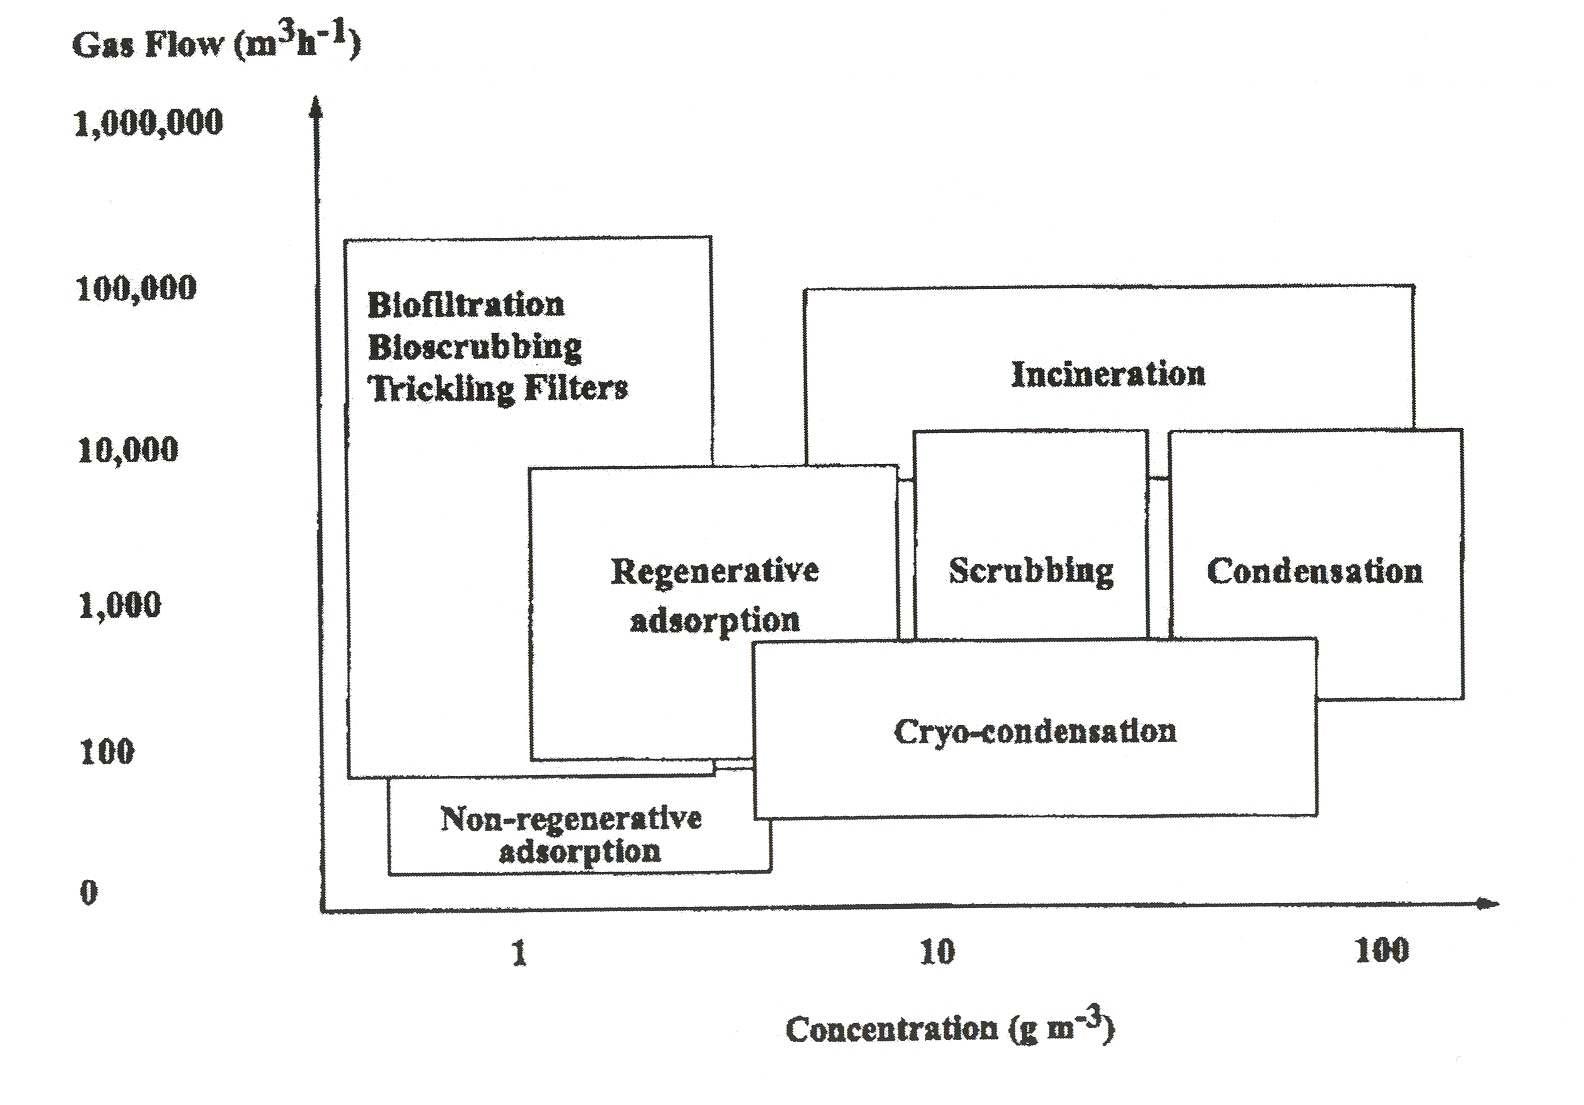 Applicability of odor control technologies.